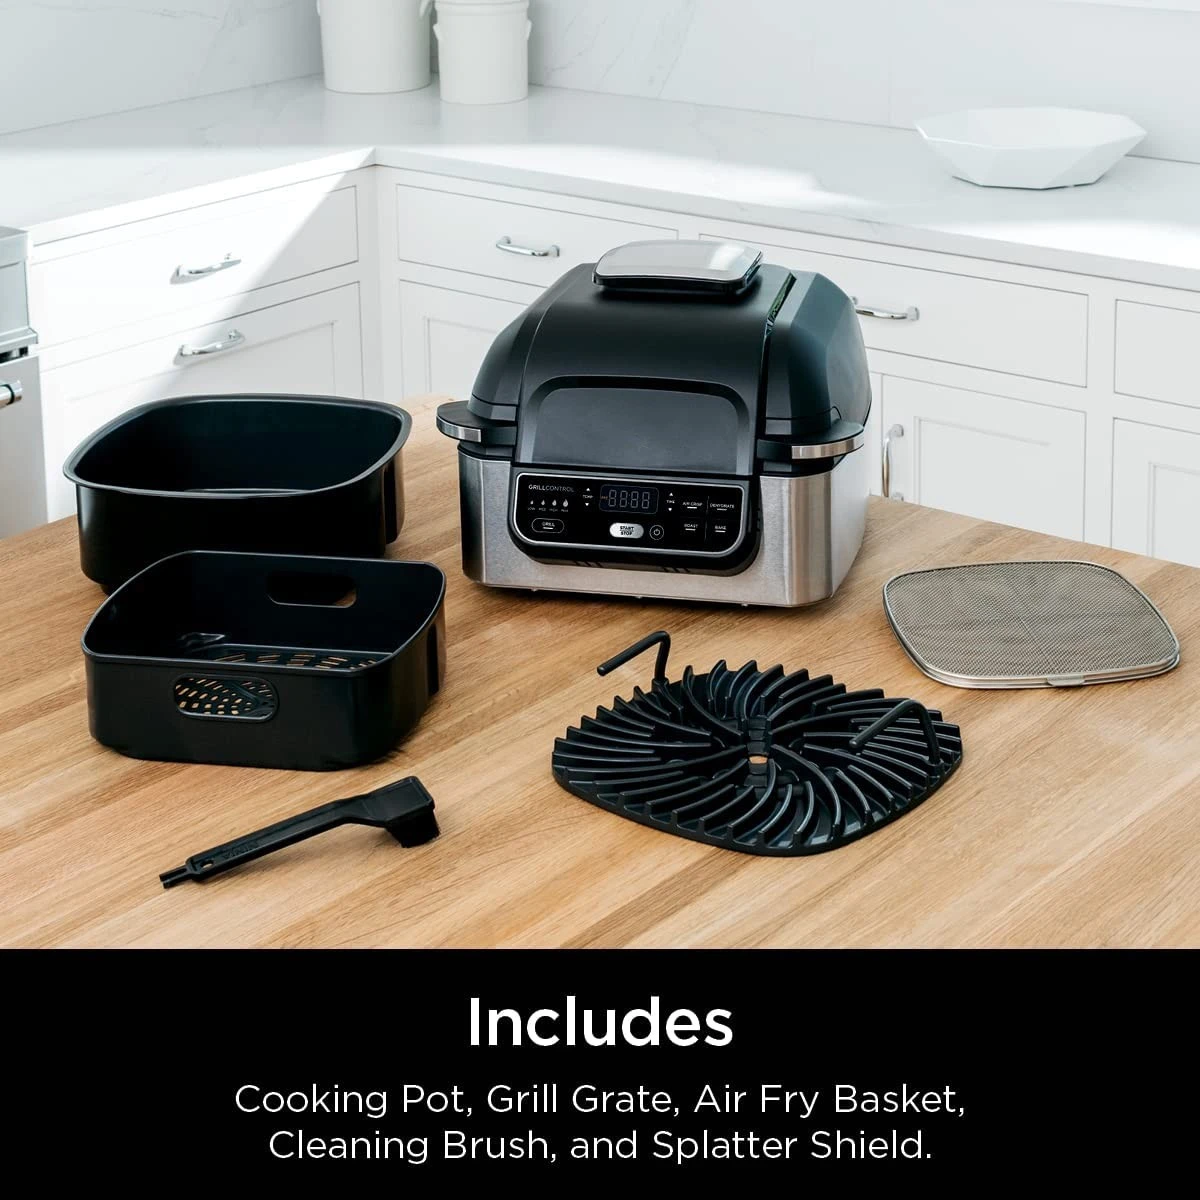 AG301 Foodi 5-in-1 Indoor Grill with Air Fry, Roast, Bake & Dehydrate, Black/Silver